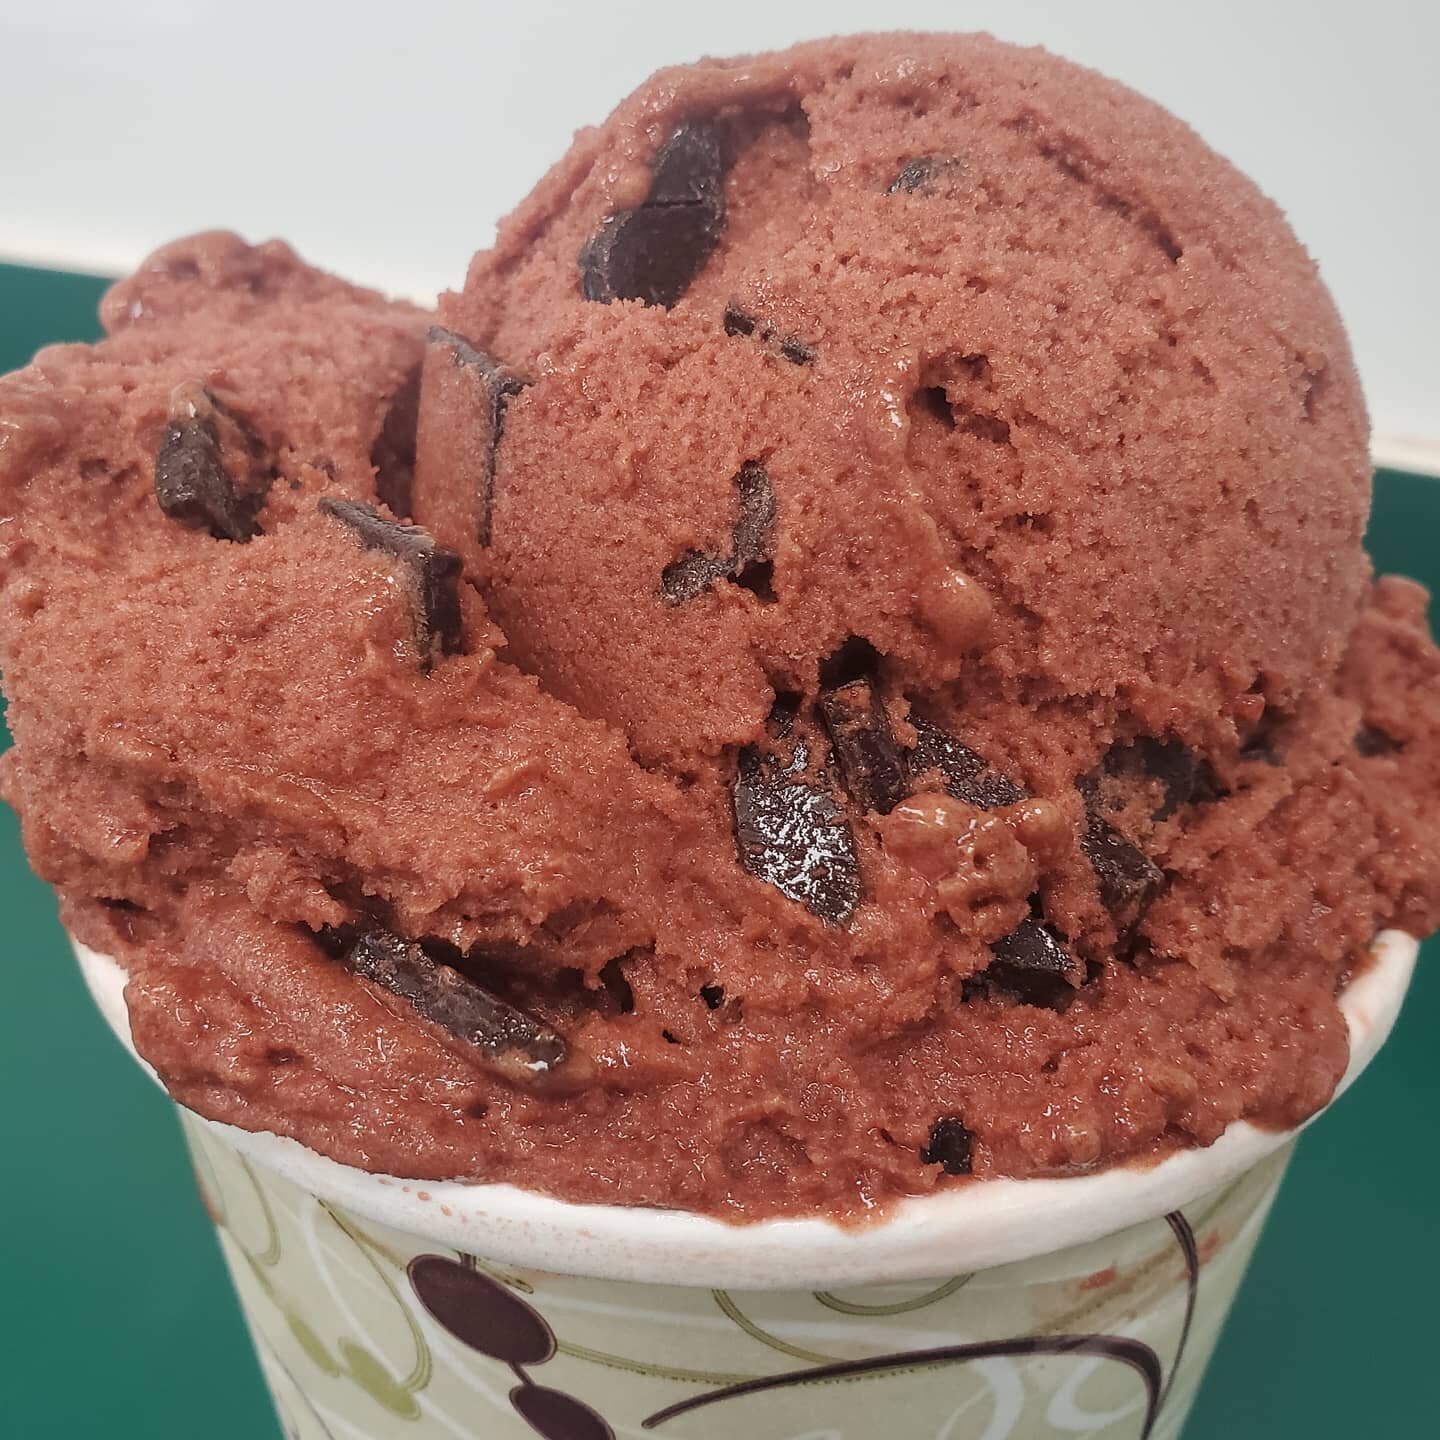 Chocolate Coverd Strawberry Chunk
Open til 10pm